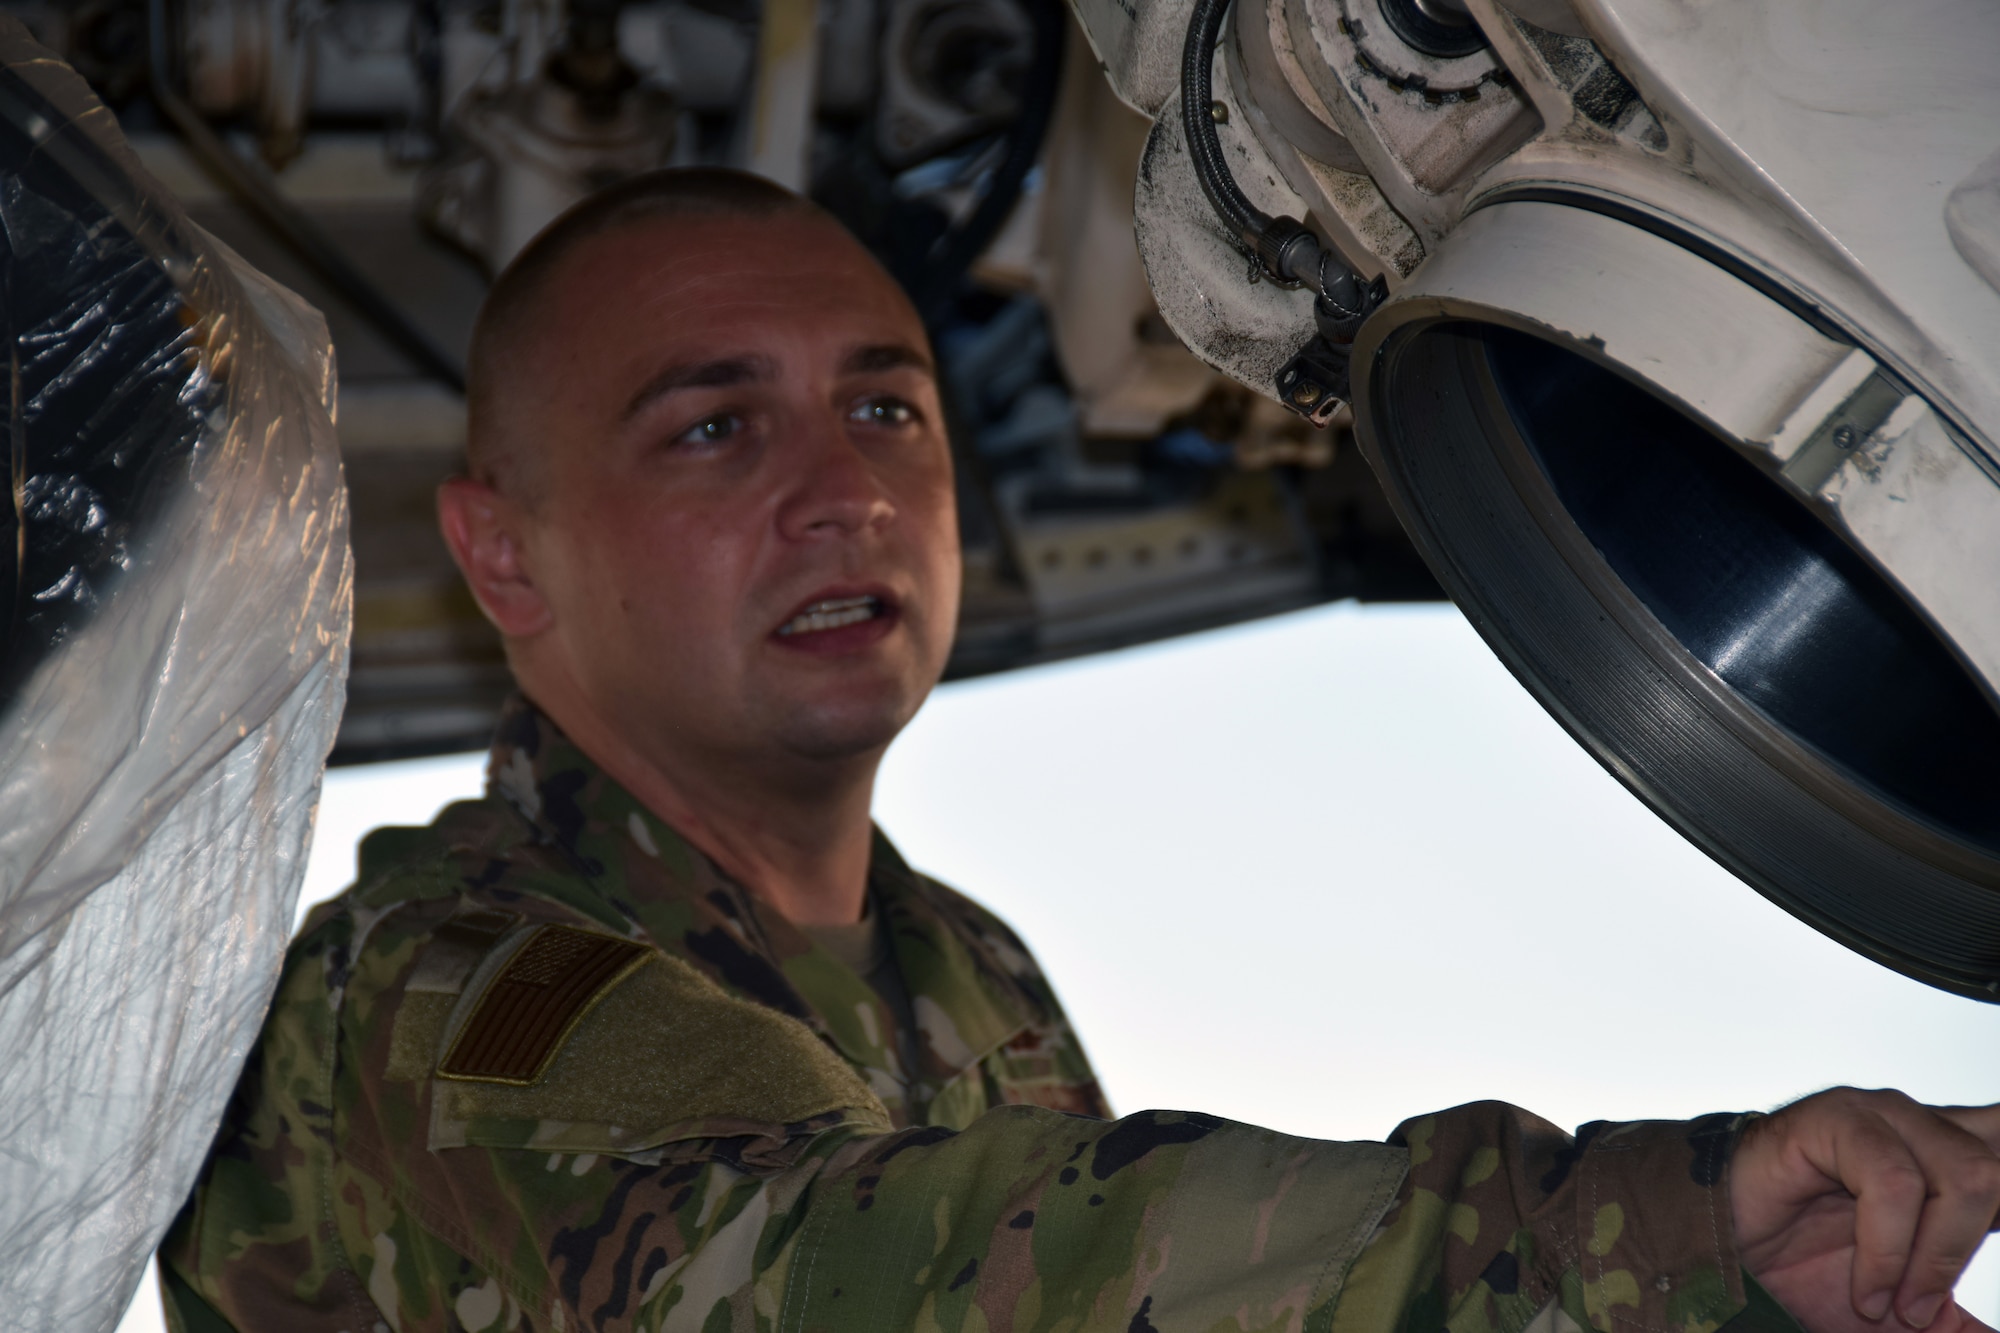 Tech. Sgt. Muris Secerbegovic, 433rd Maintenance Group quality assurance inspector, inspects a C-5M Super Galaxy nose landing gear assembly Aug. 3, 2020, at Joint Base San Antonio-Lackland, Texas.